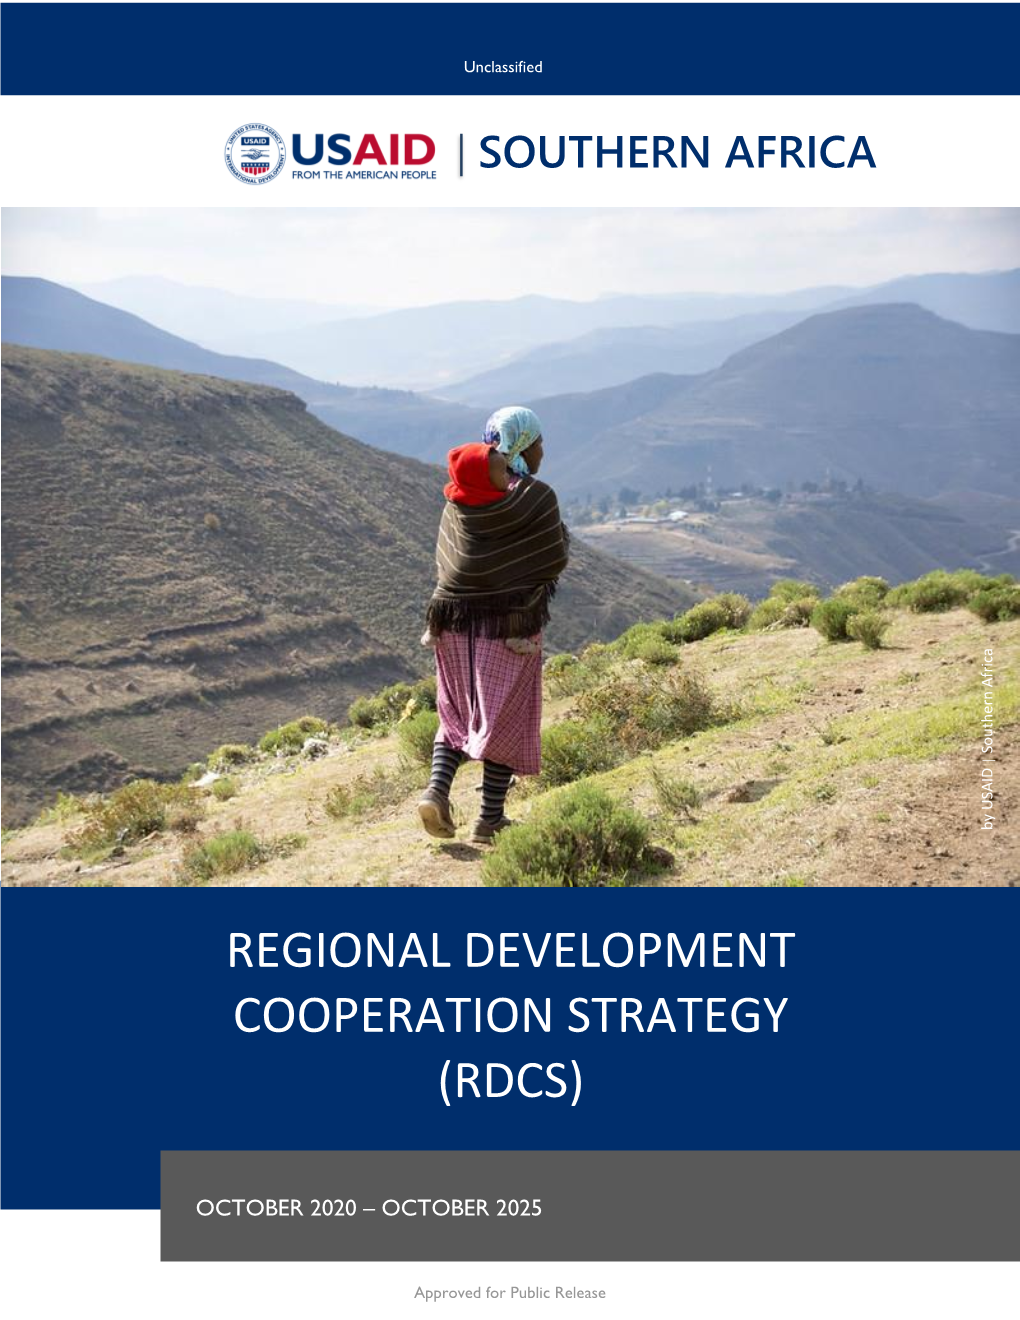 USAID Southern Africa Regional Development Cooperation Strategy